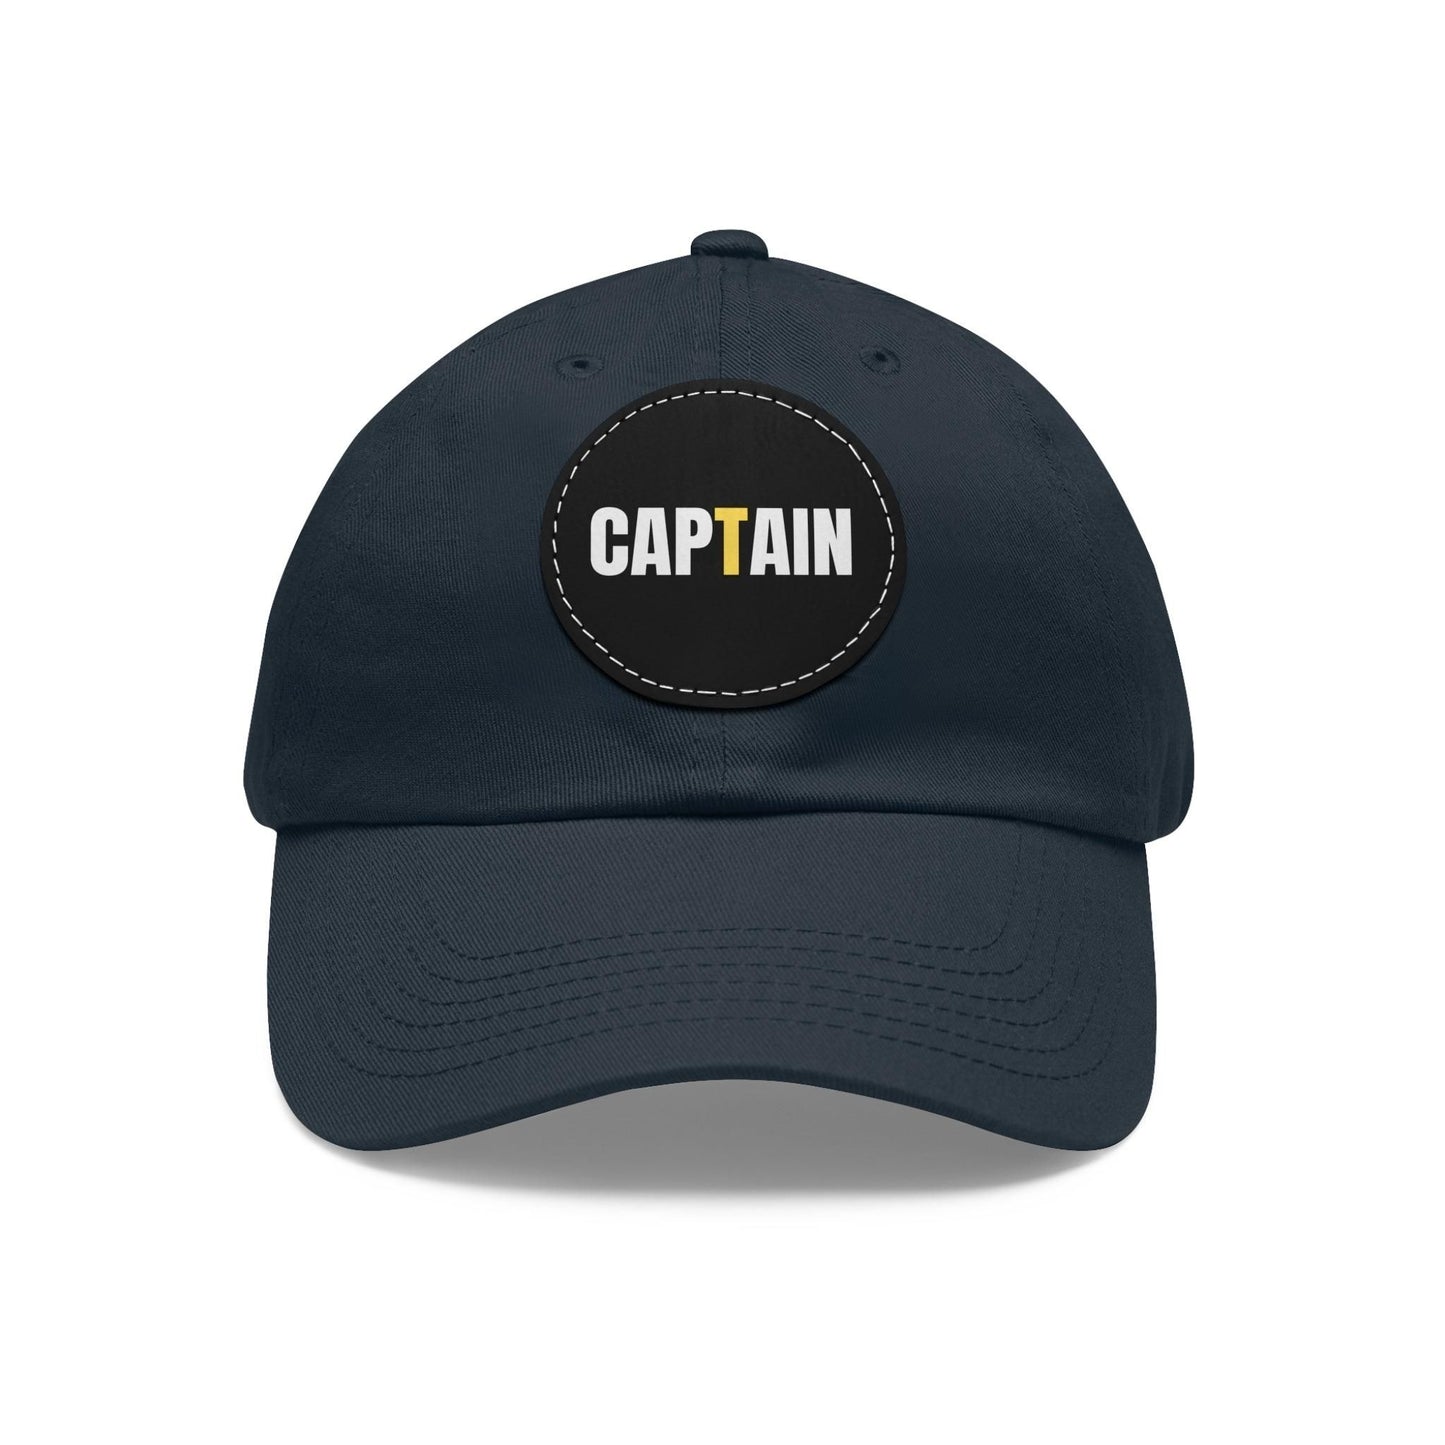 Captain Baseball Hat with Leather Patch Cap Navy / Black patch Circle One size